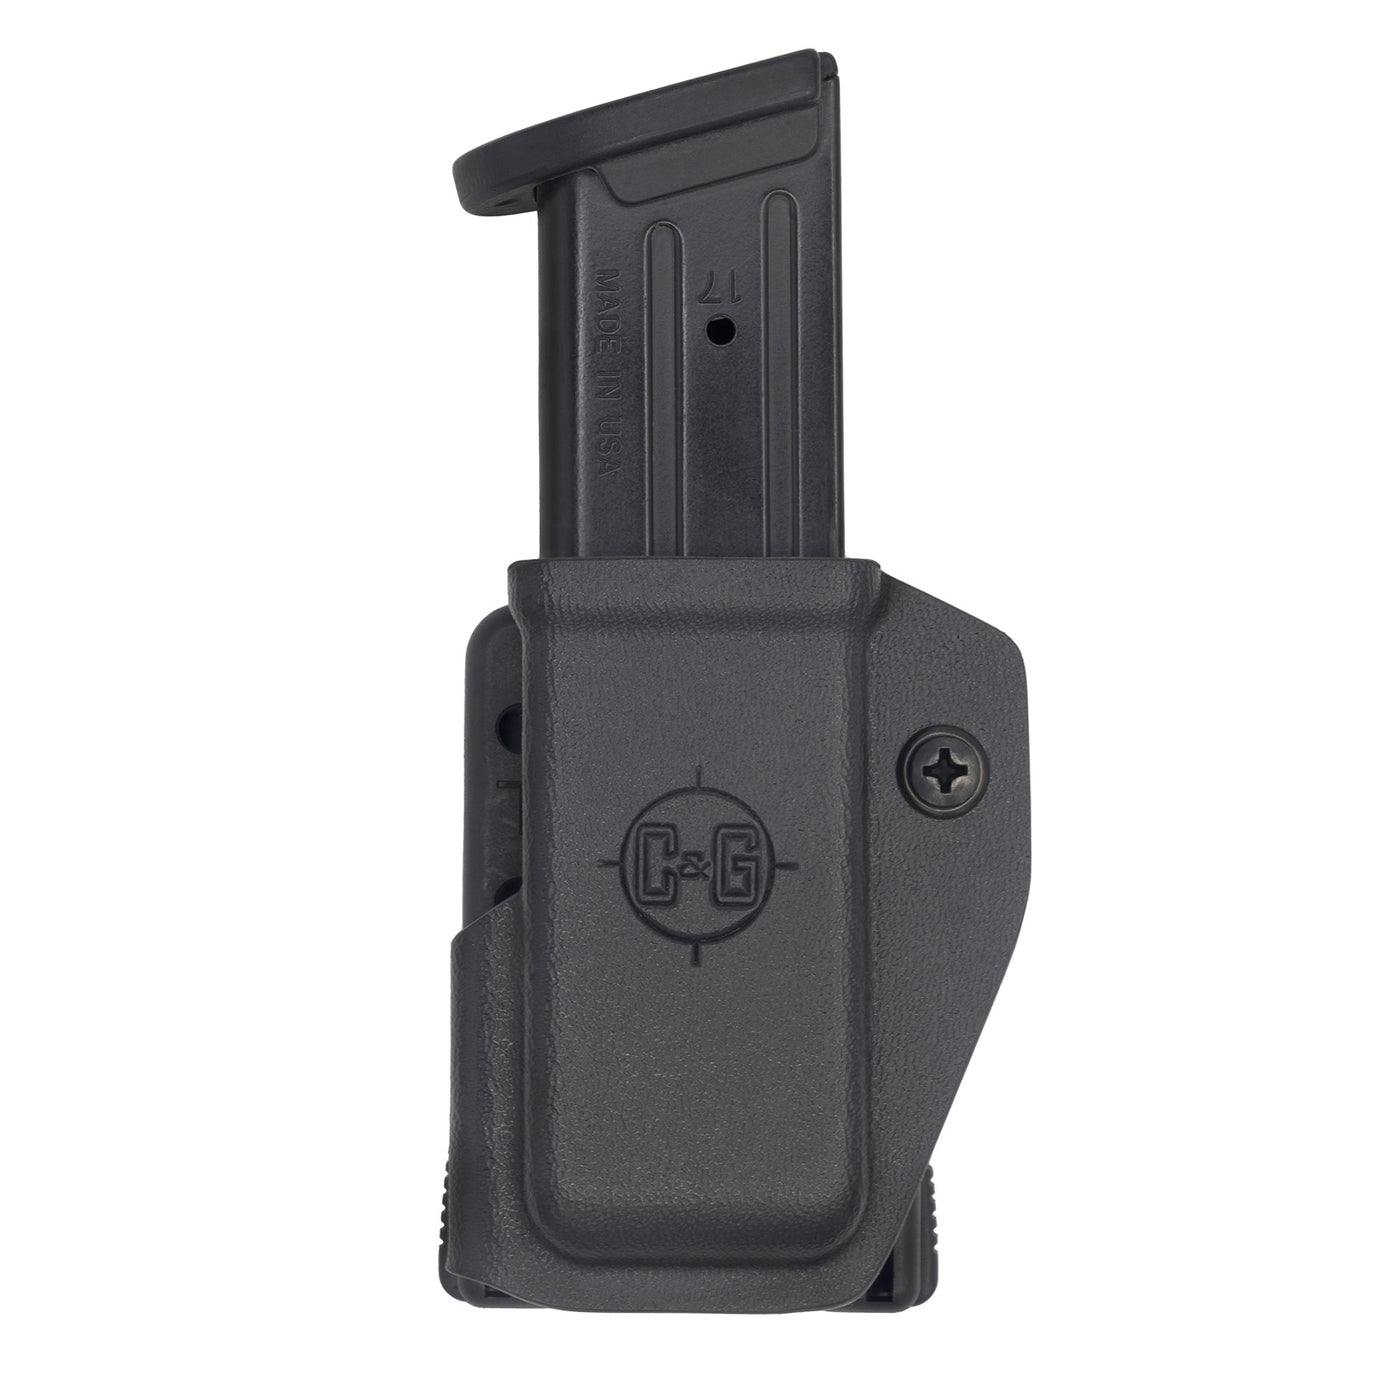 Metal 9/40 competition magazine holder.